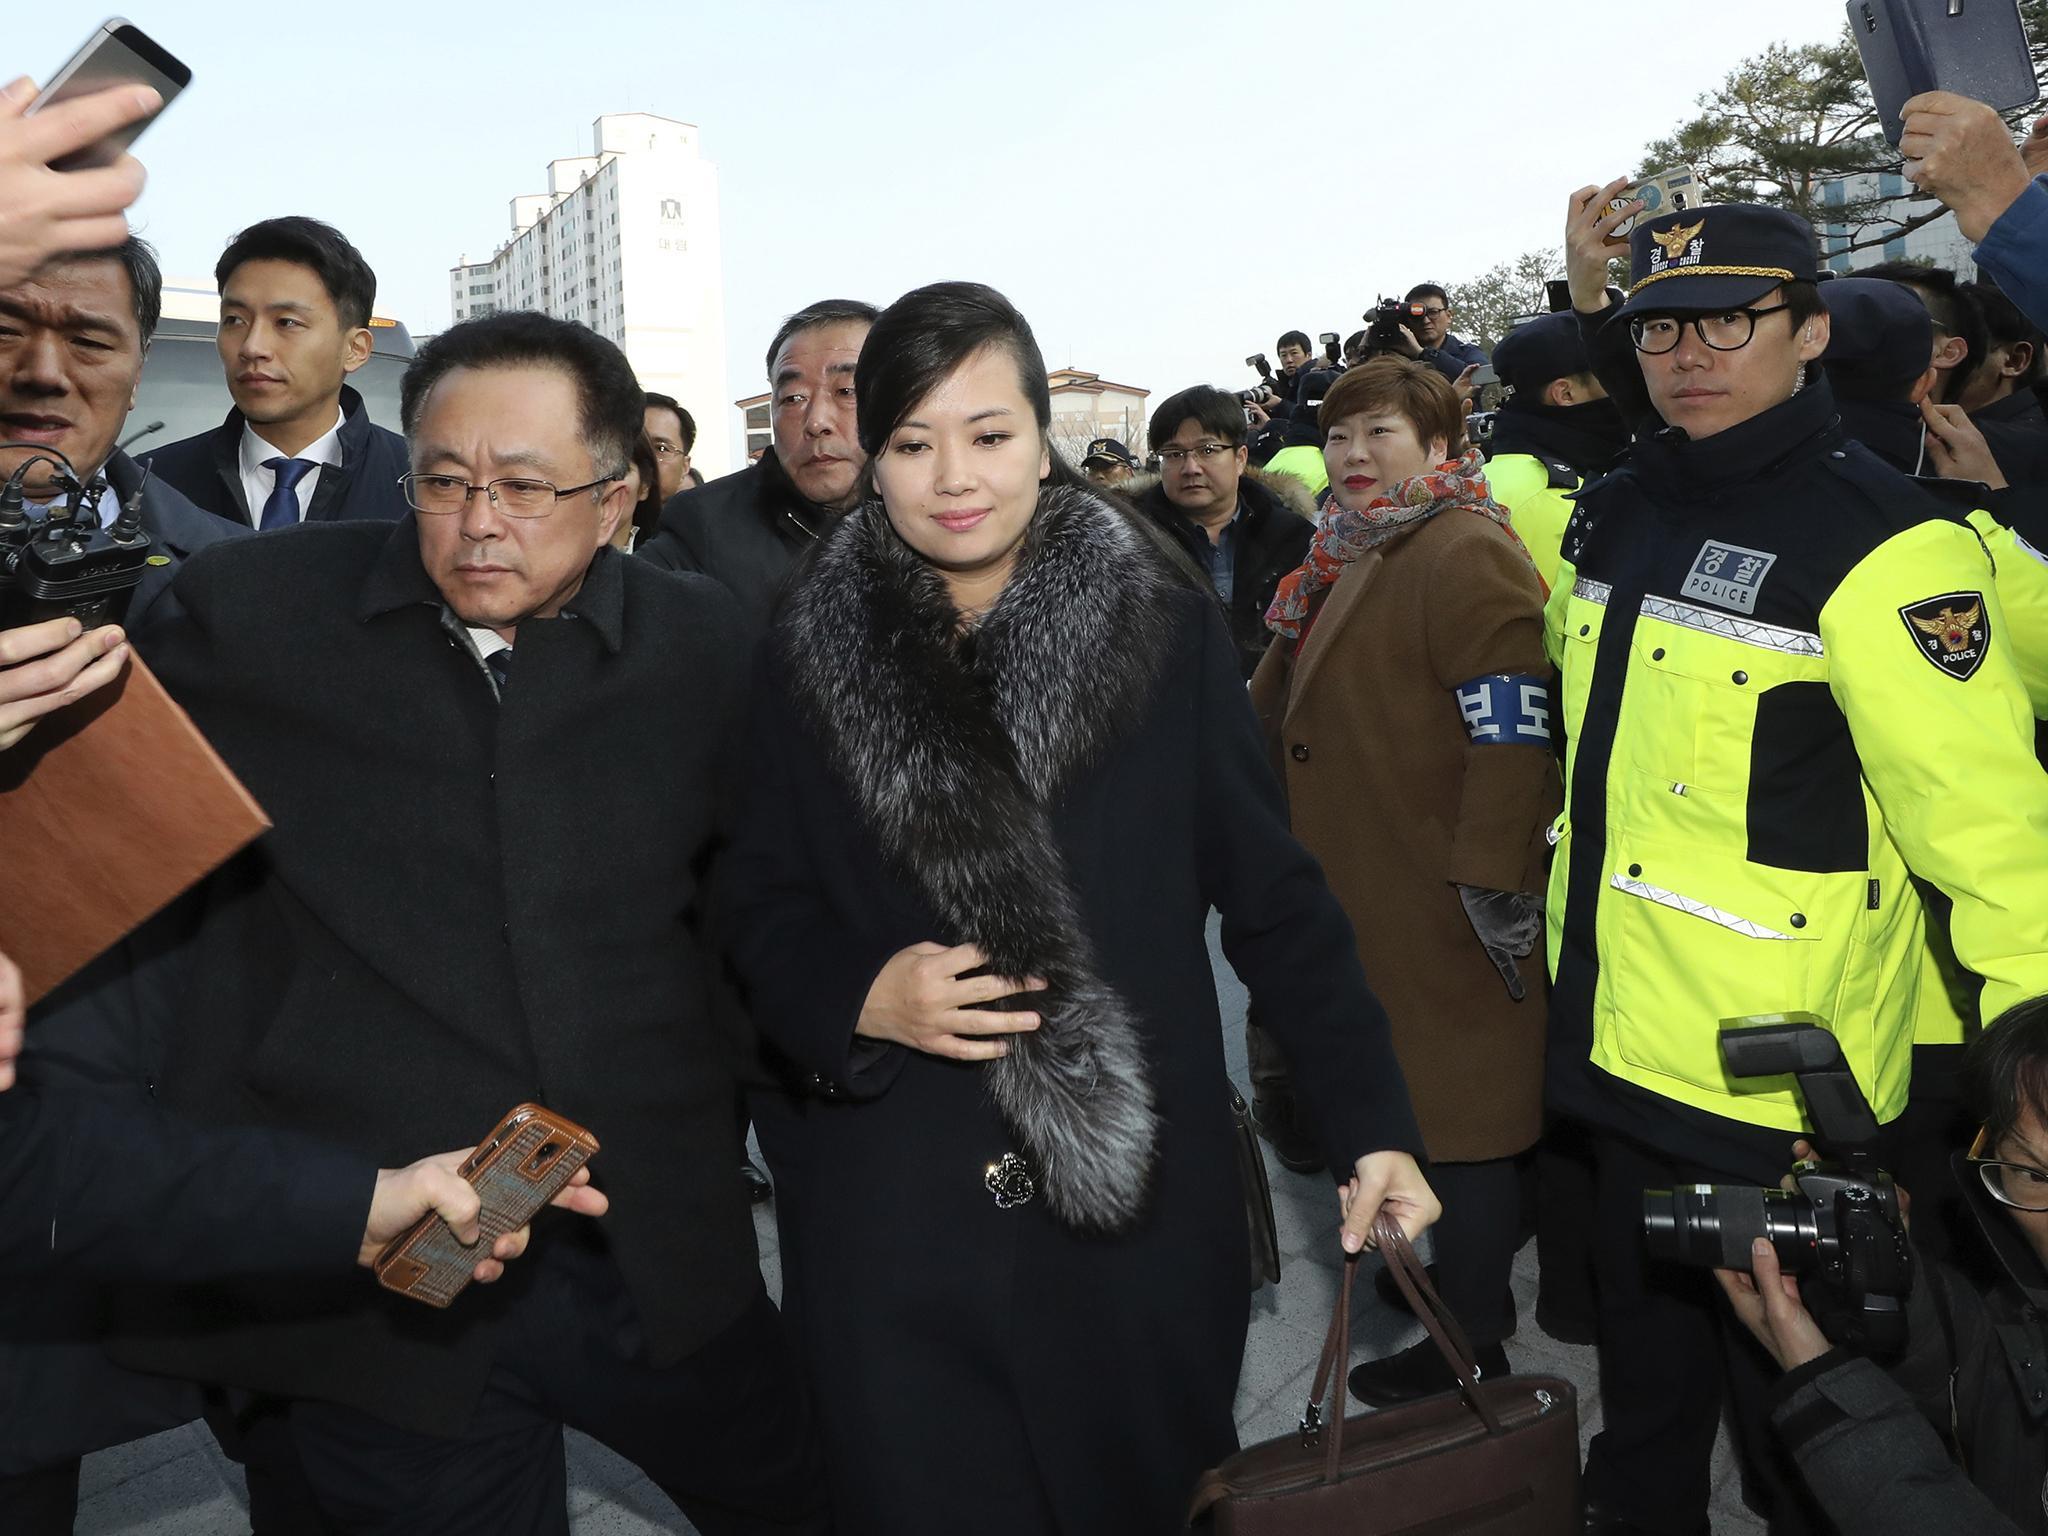 Hyong Song Wol was present for last week's talks which confirmed her music group's two live acts